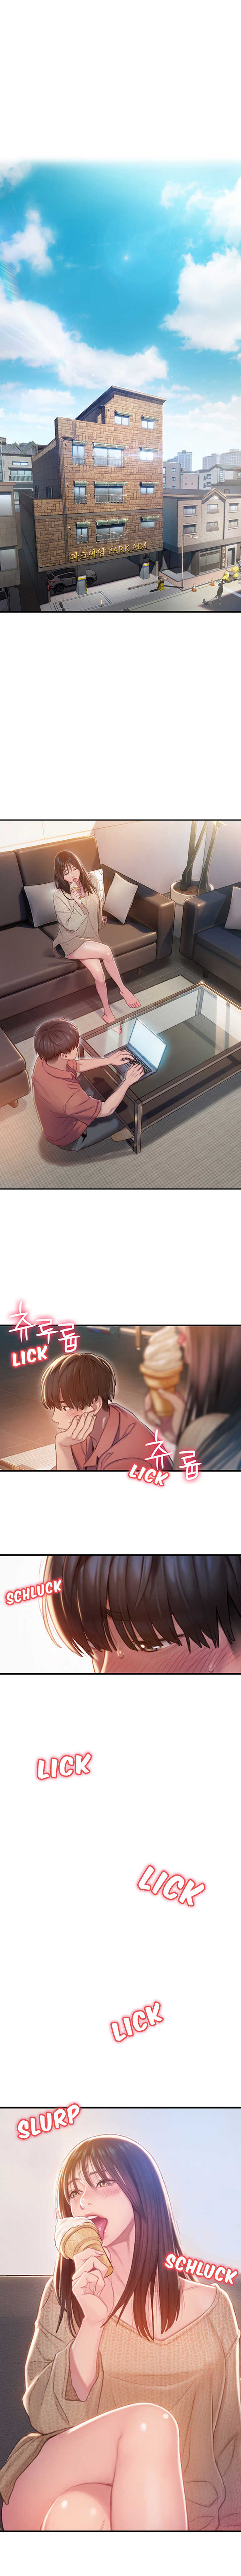 [Park Hyeongjun] Love Limit Exceeded V.2 (01-09) (Ongoing) - Page 2